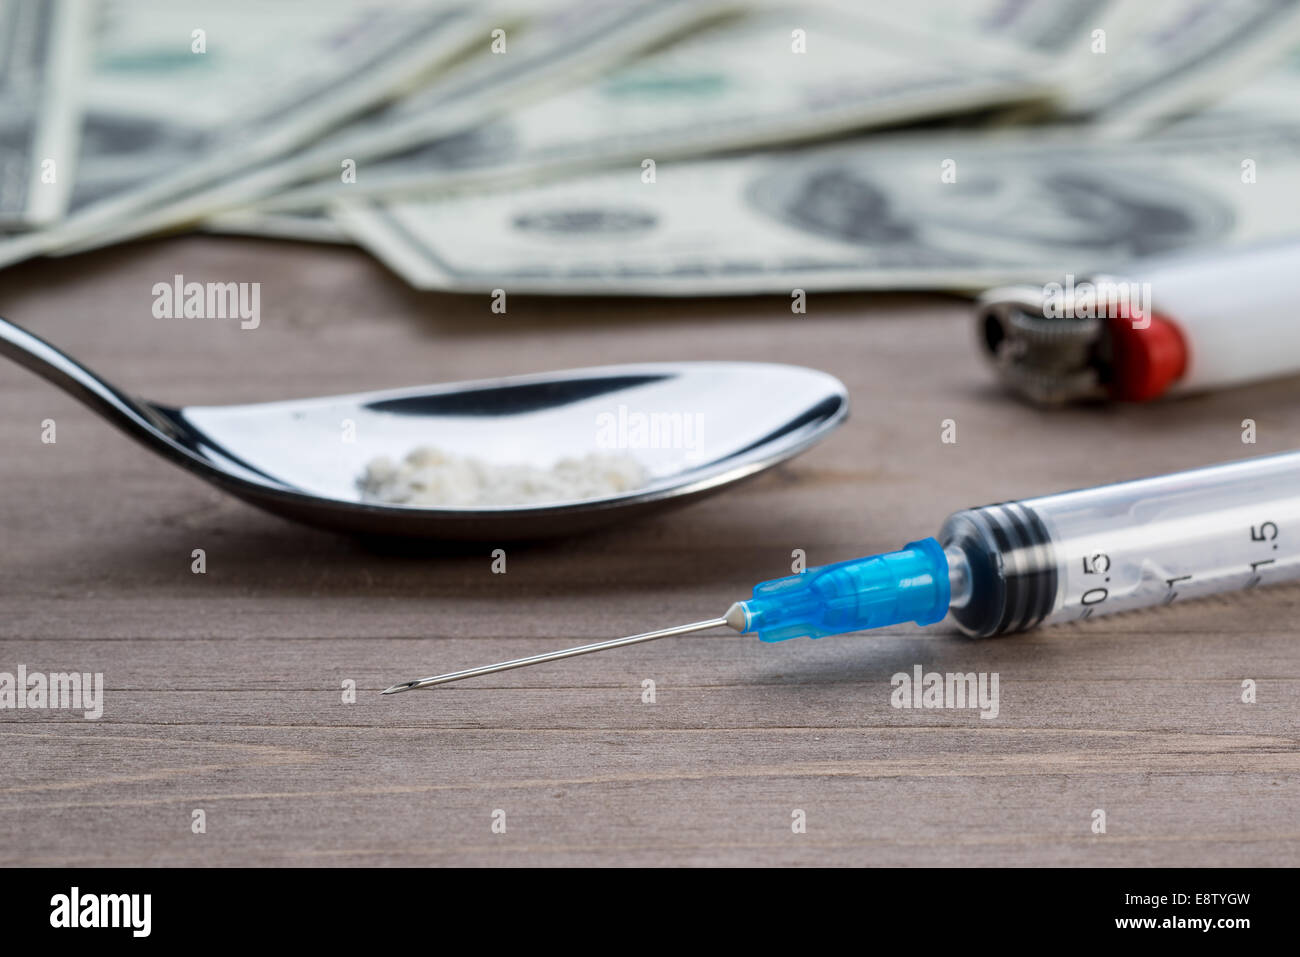 Drug syringe, cooked heroin on spoon and money Stock Photo